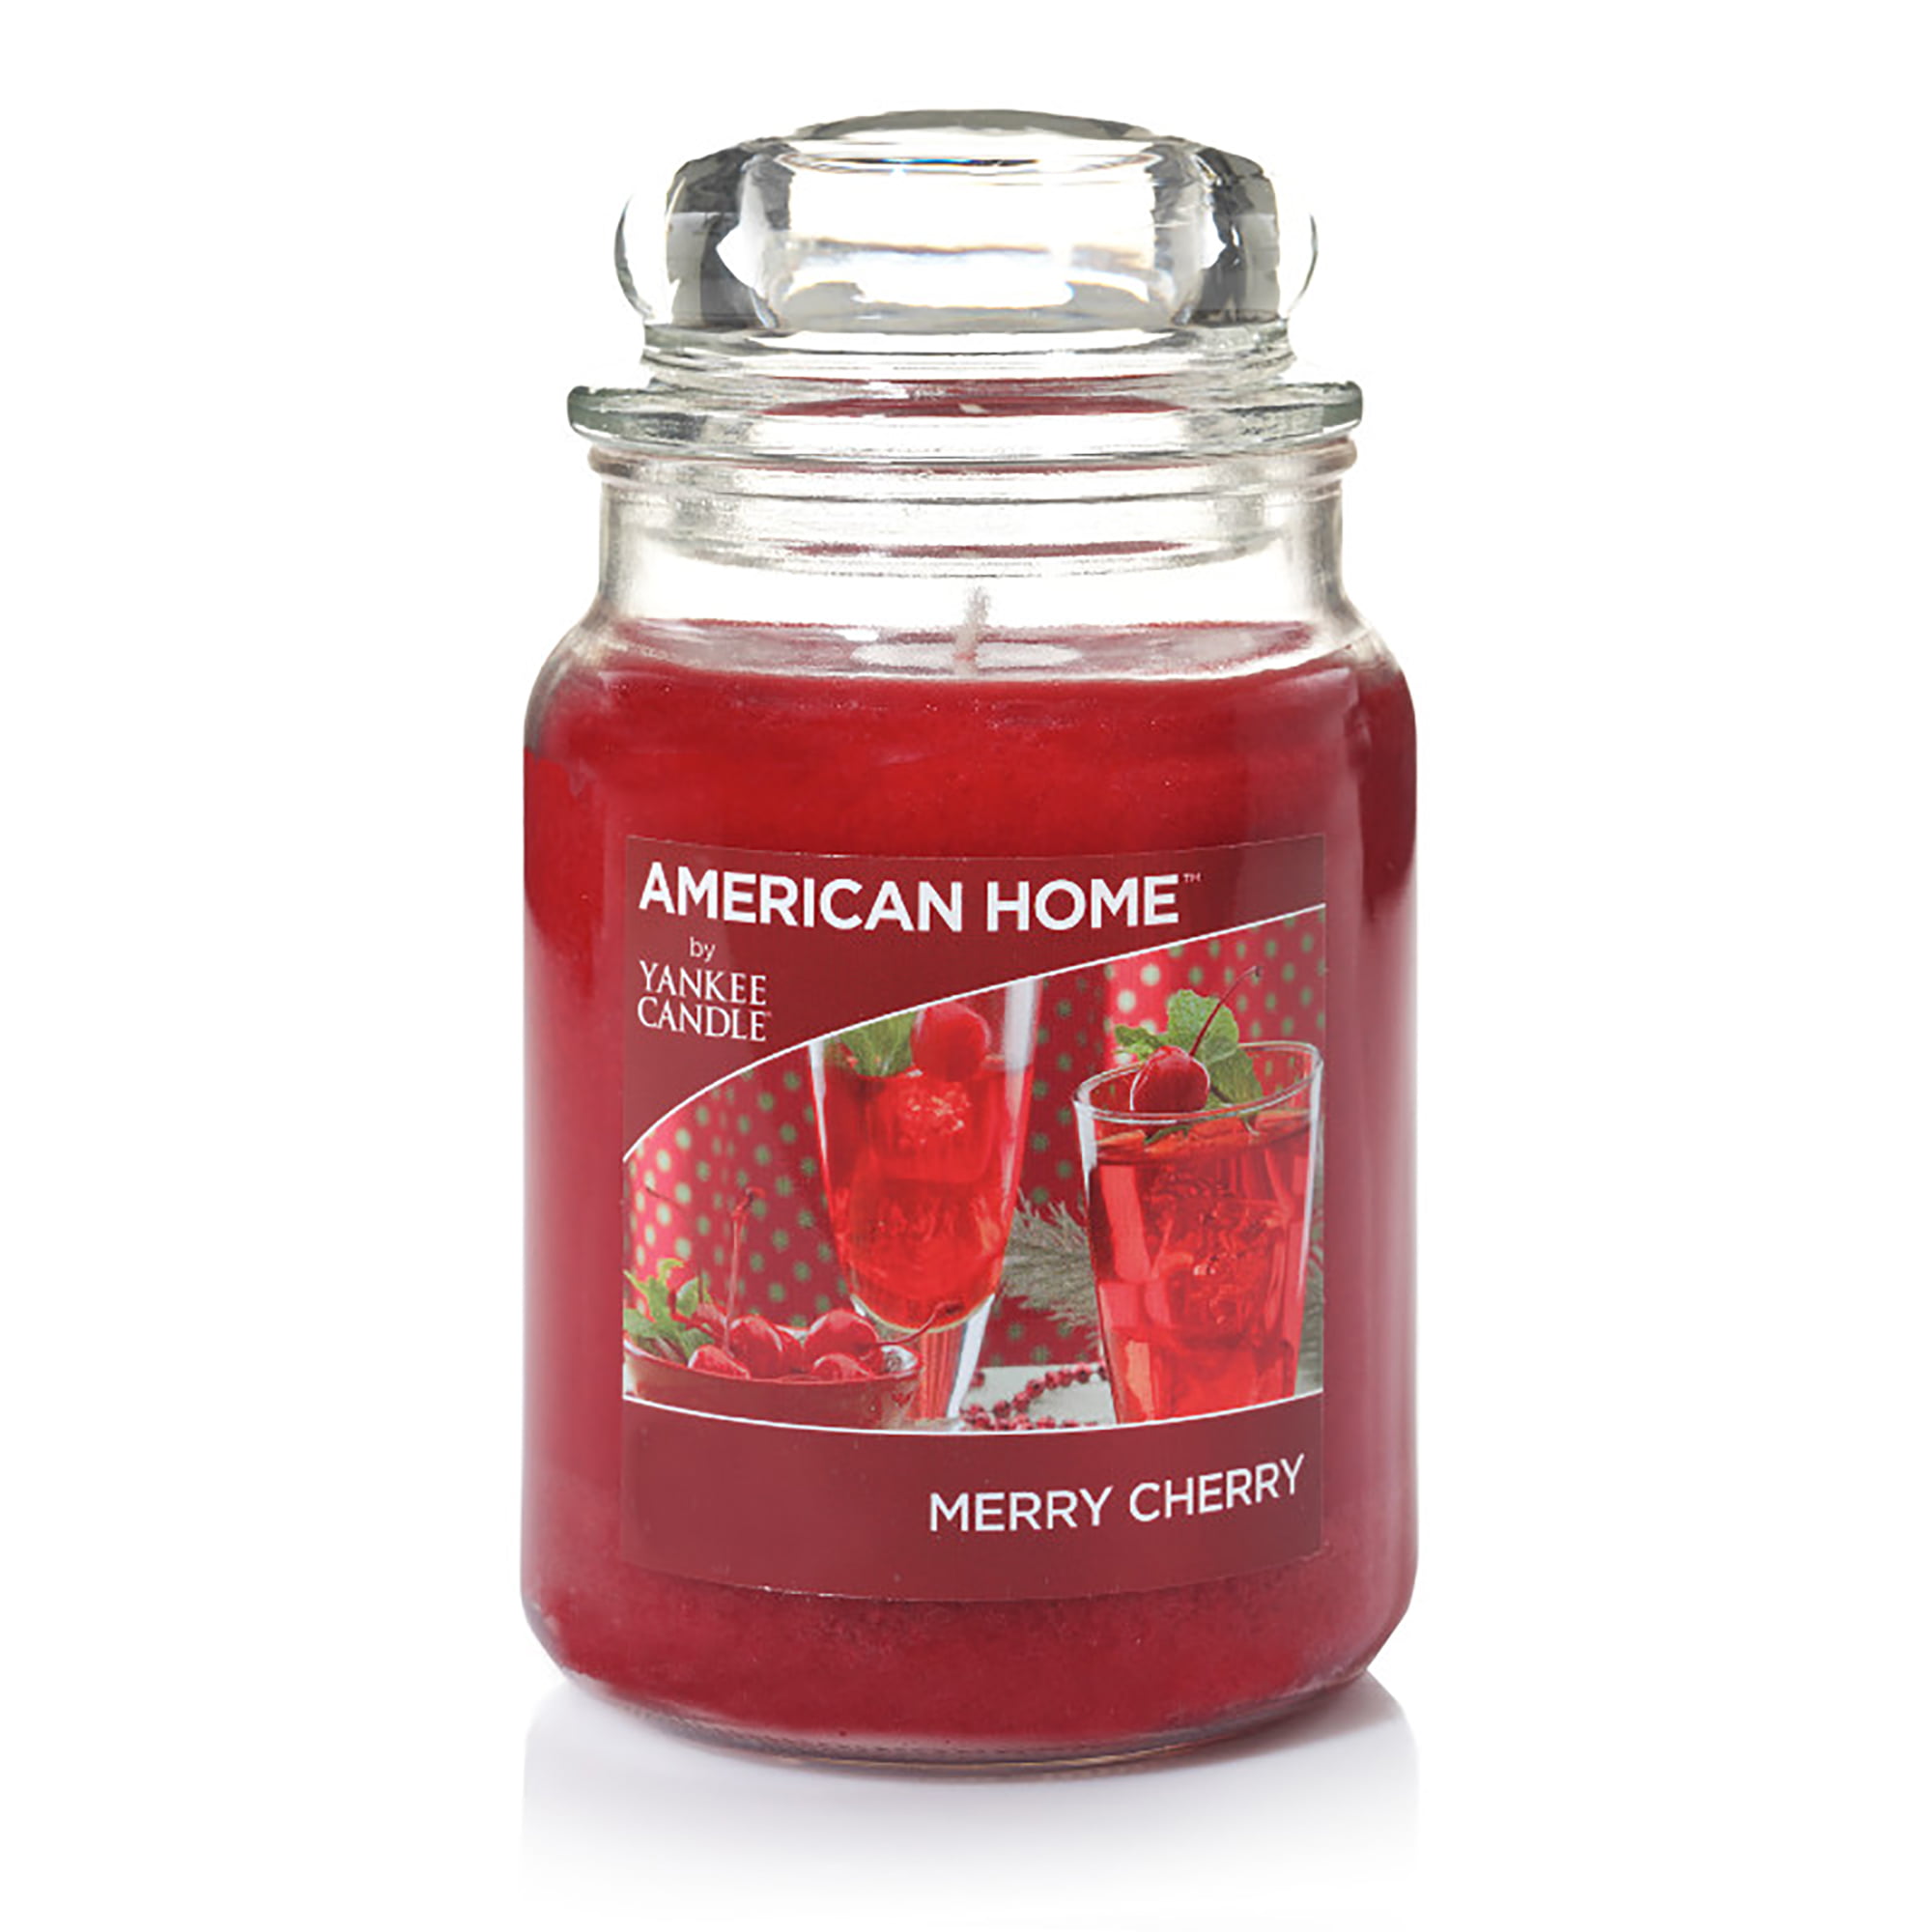 American Home by Yankee Candle Merry Cherry Candle, 19 oz Large Jar